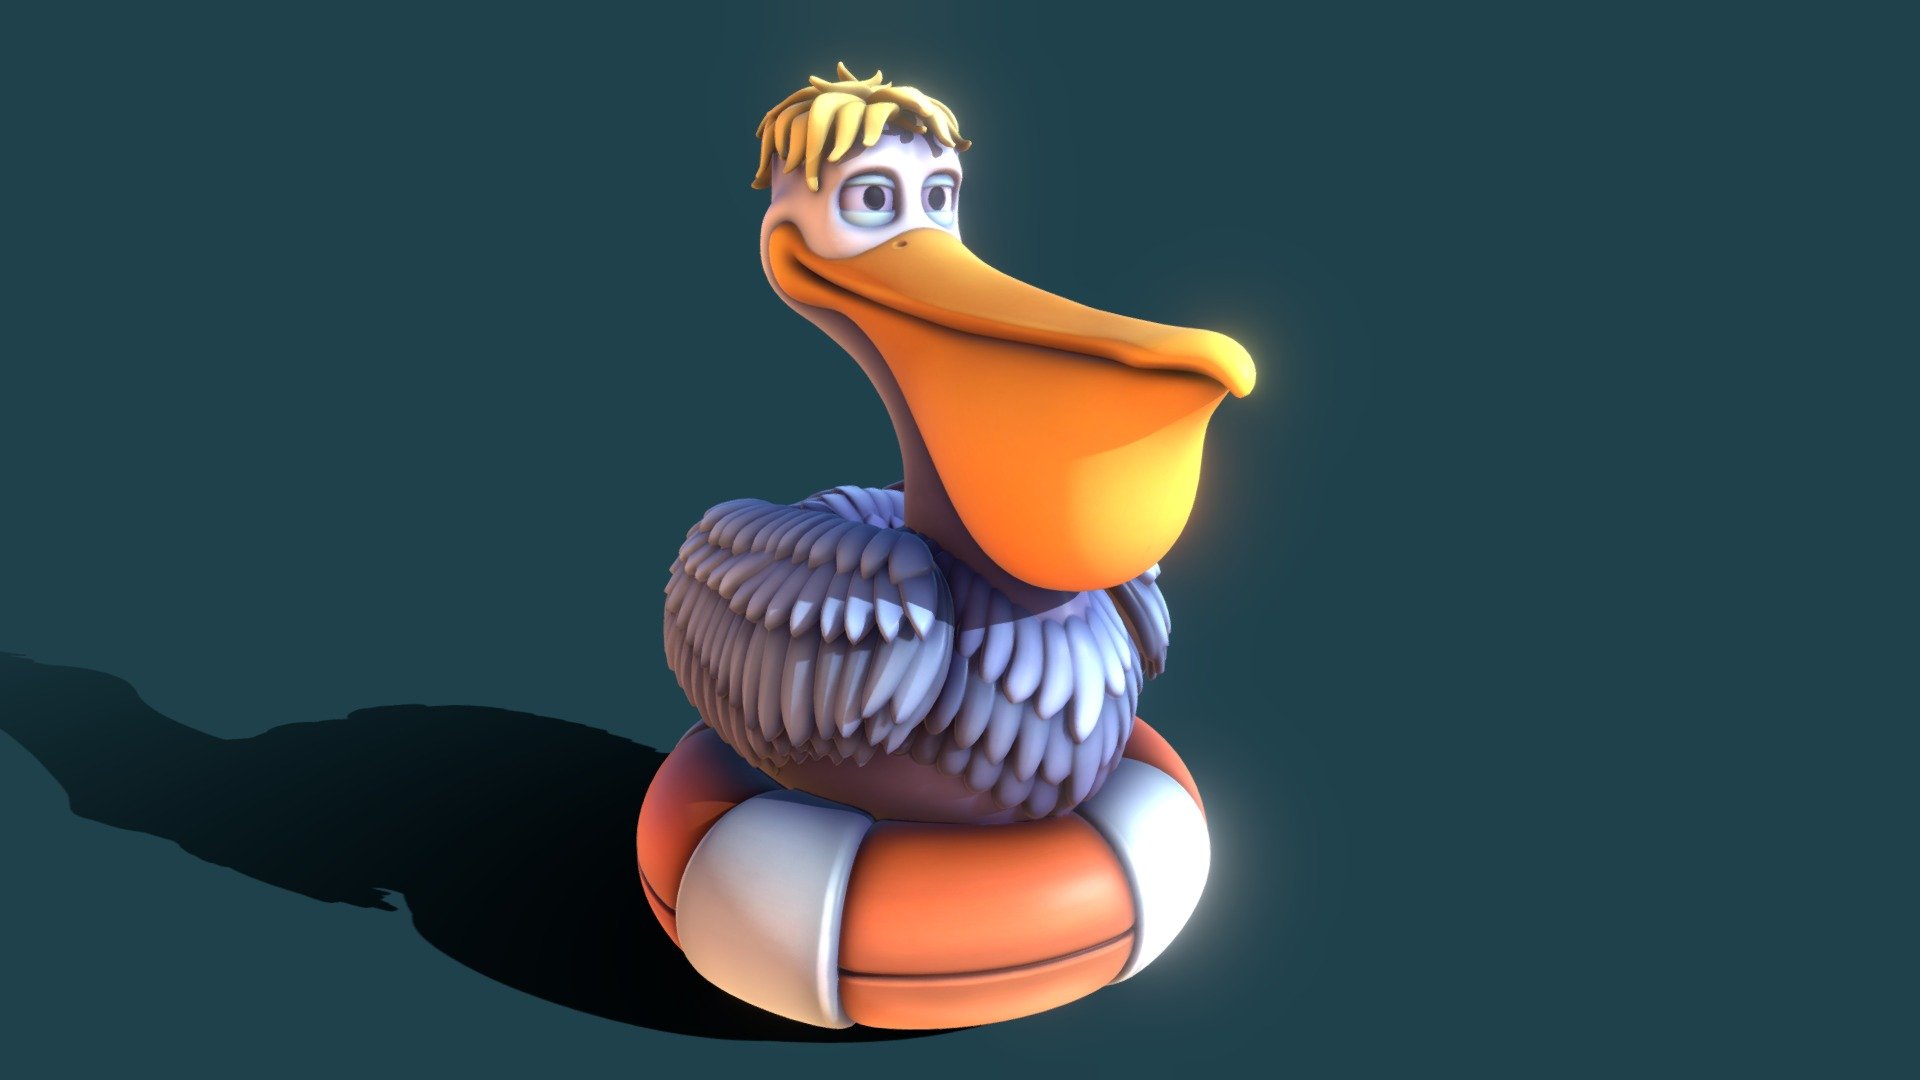 Cartoonish Pelican model, made for 3D printing. It will be ready for download soon! - Cartoon Pelican - 3D model by BlackSpire 3d model